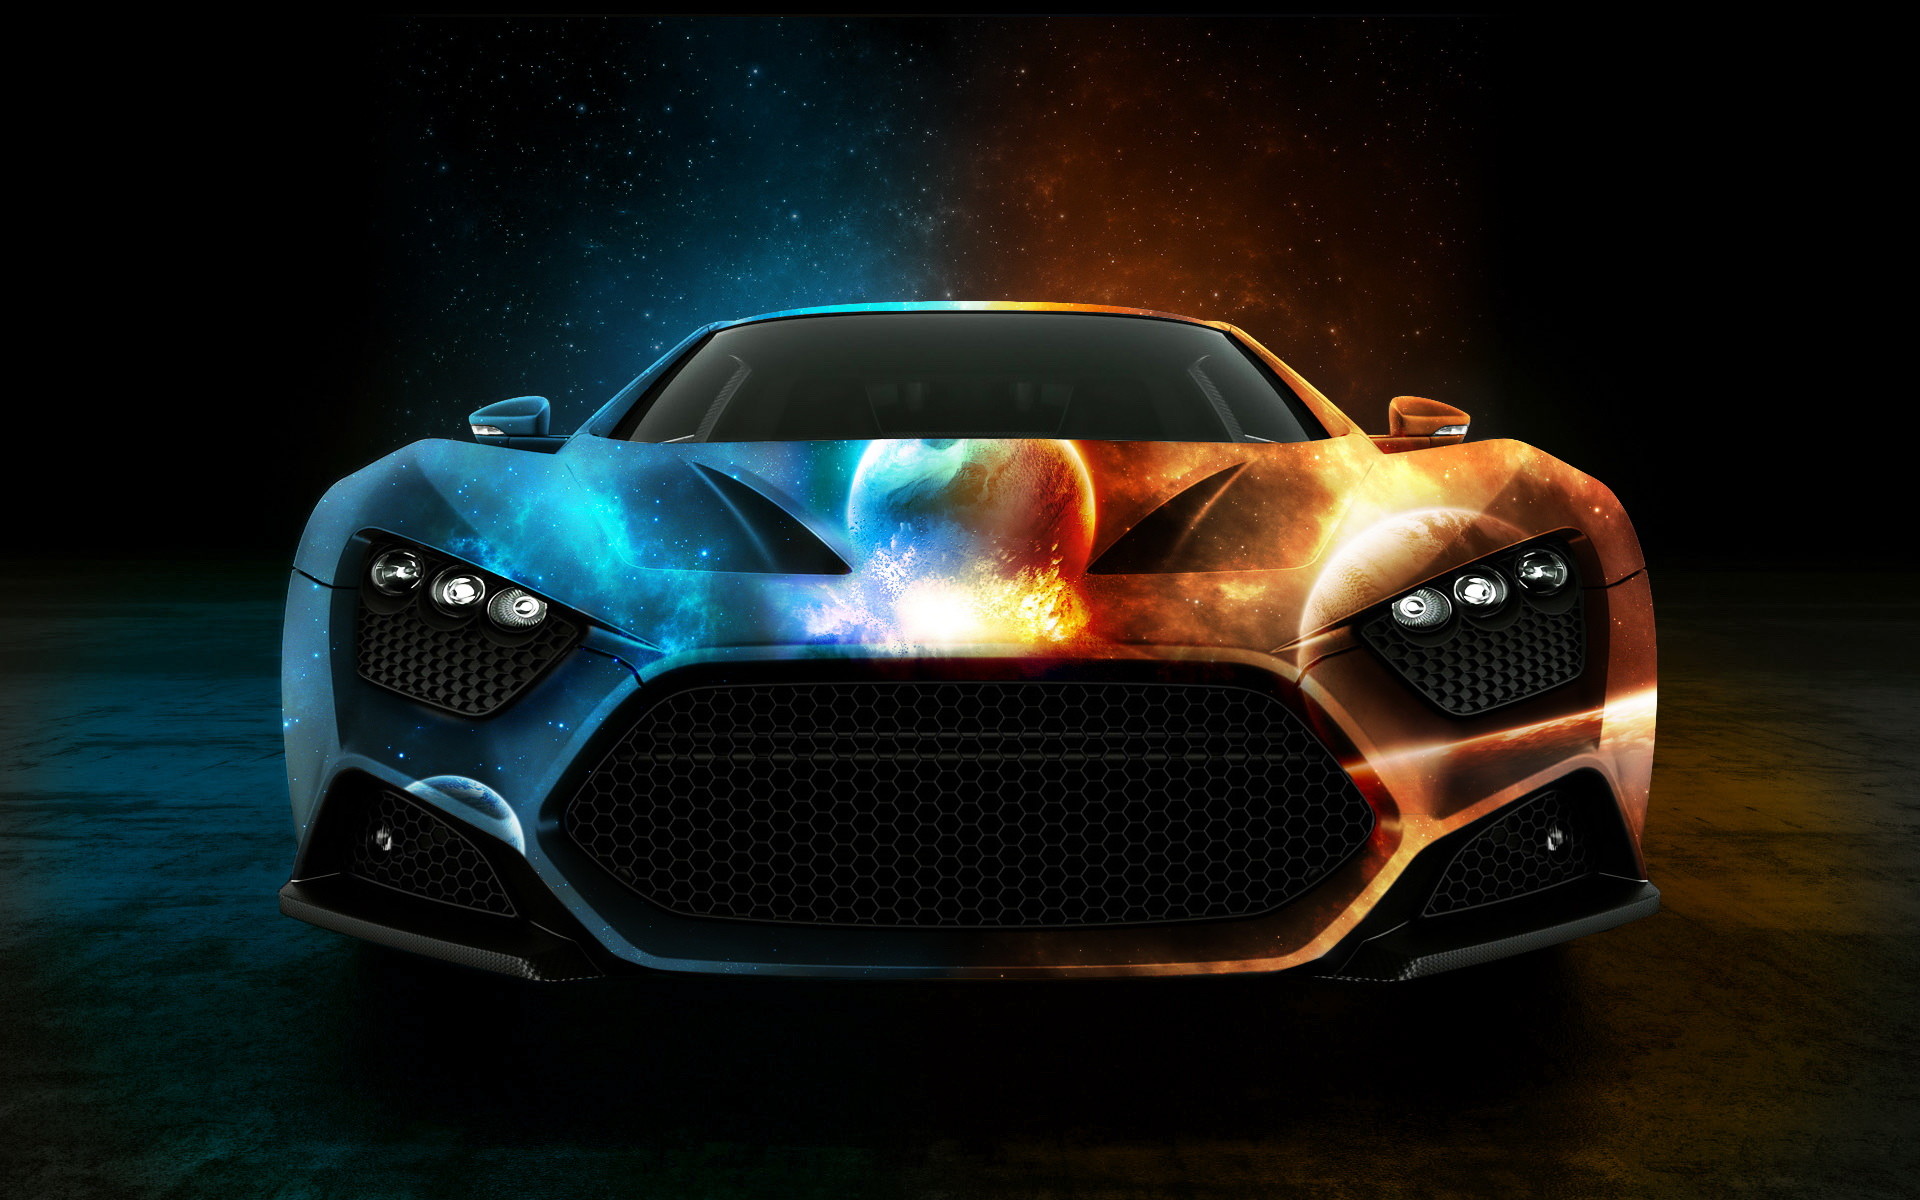 1920x1200 Water and Fire Car Wallpaper - iBackgroundWallpaper